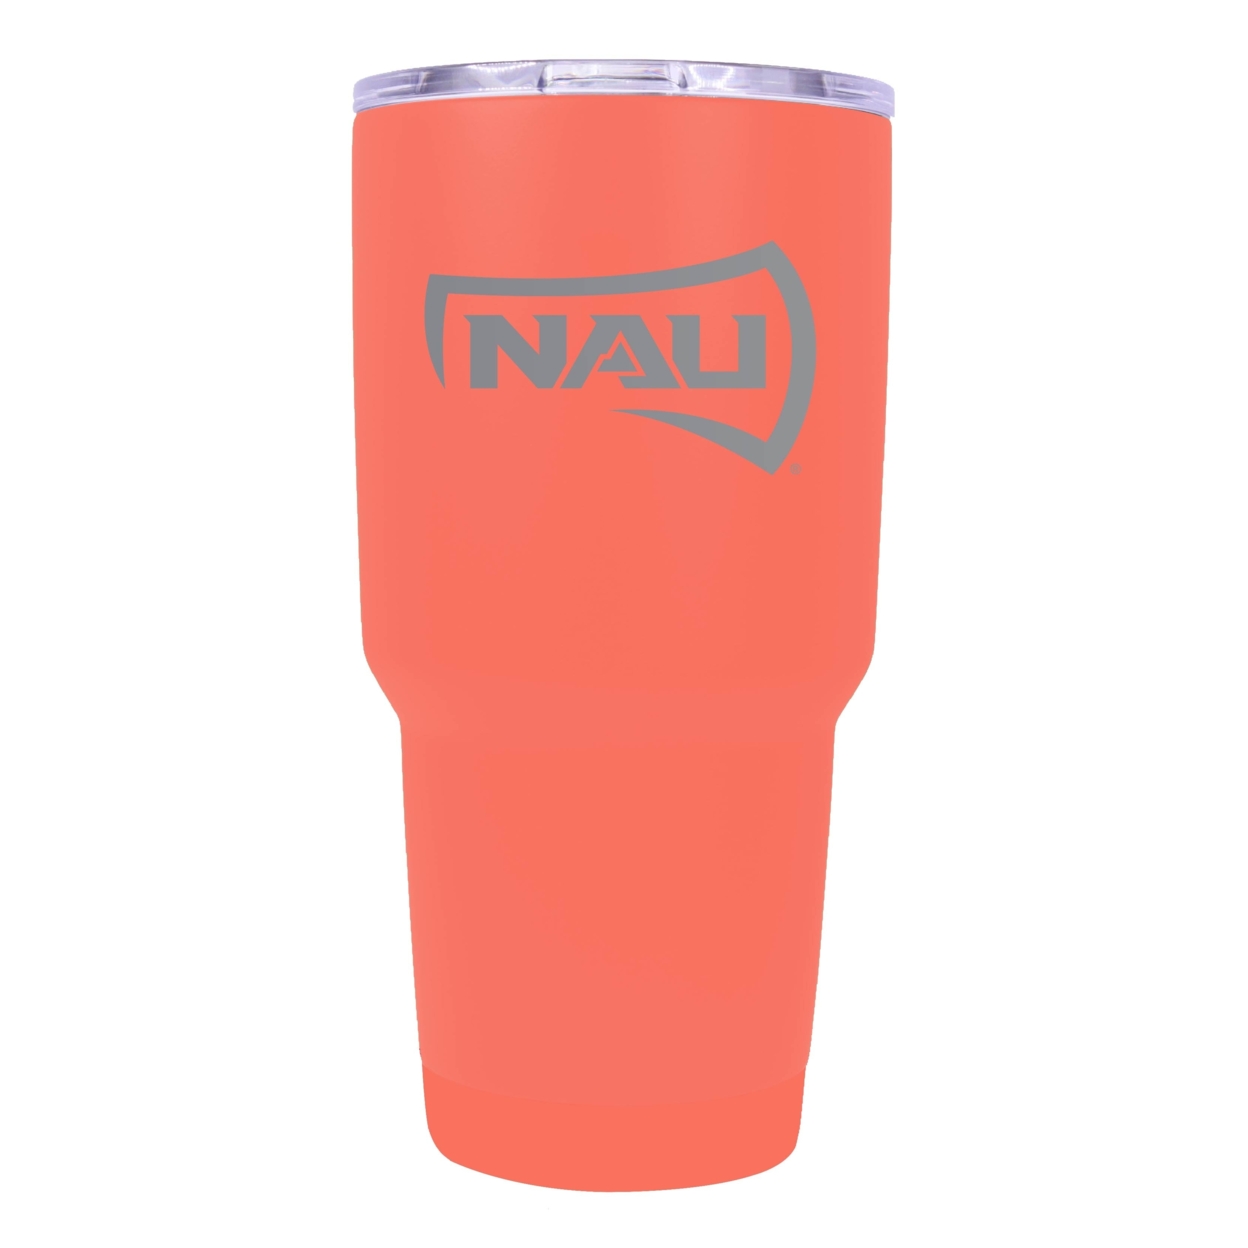 Northern Arizona University 24 Oz Laser Engraved Stainless Steel Insulated Tumbler - Choose Your Color. - Coral